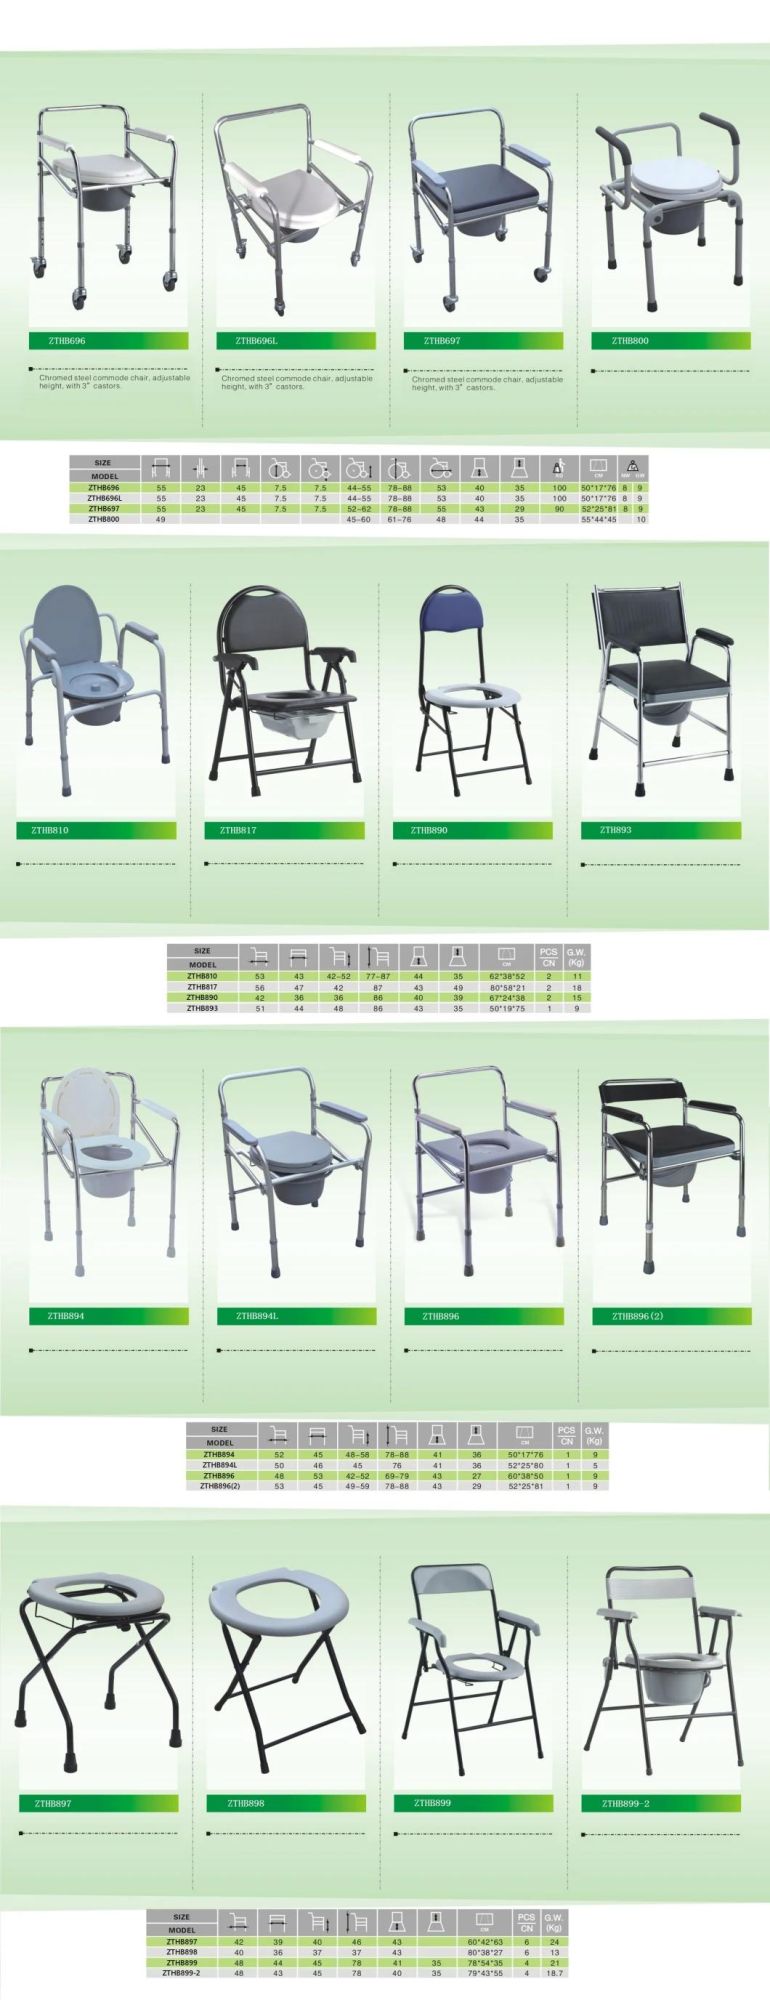 Easy Carry Outdoor Antiskid Folding Lightweight Commode Toilet Seat Elderly/Disable Patient People Rehabilitation Care Products Aluminum Nursing Chair